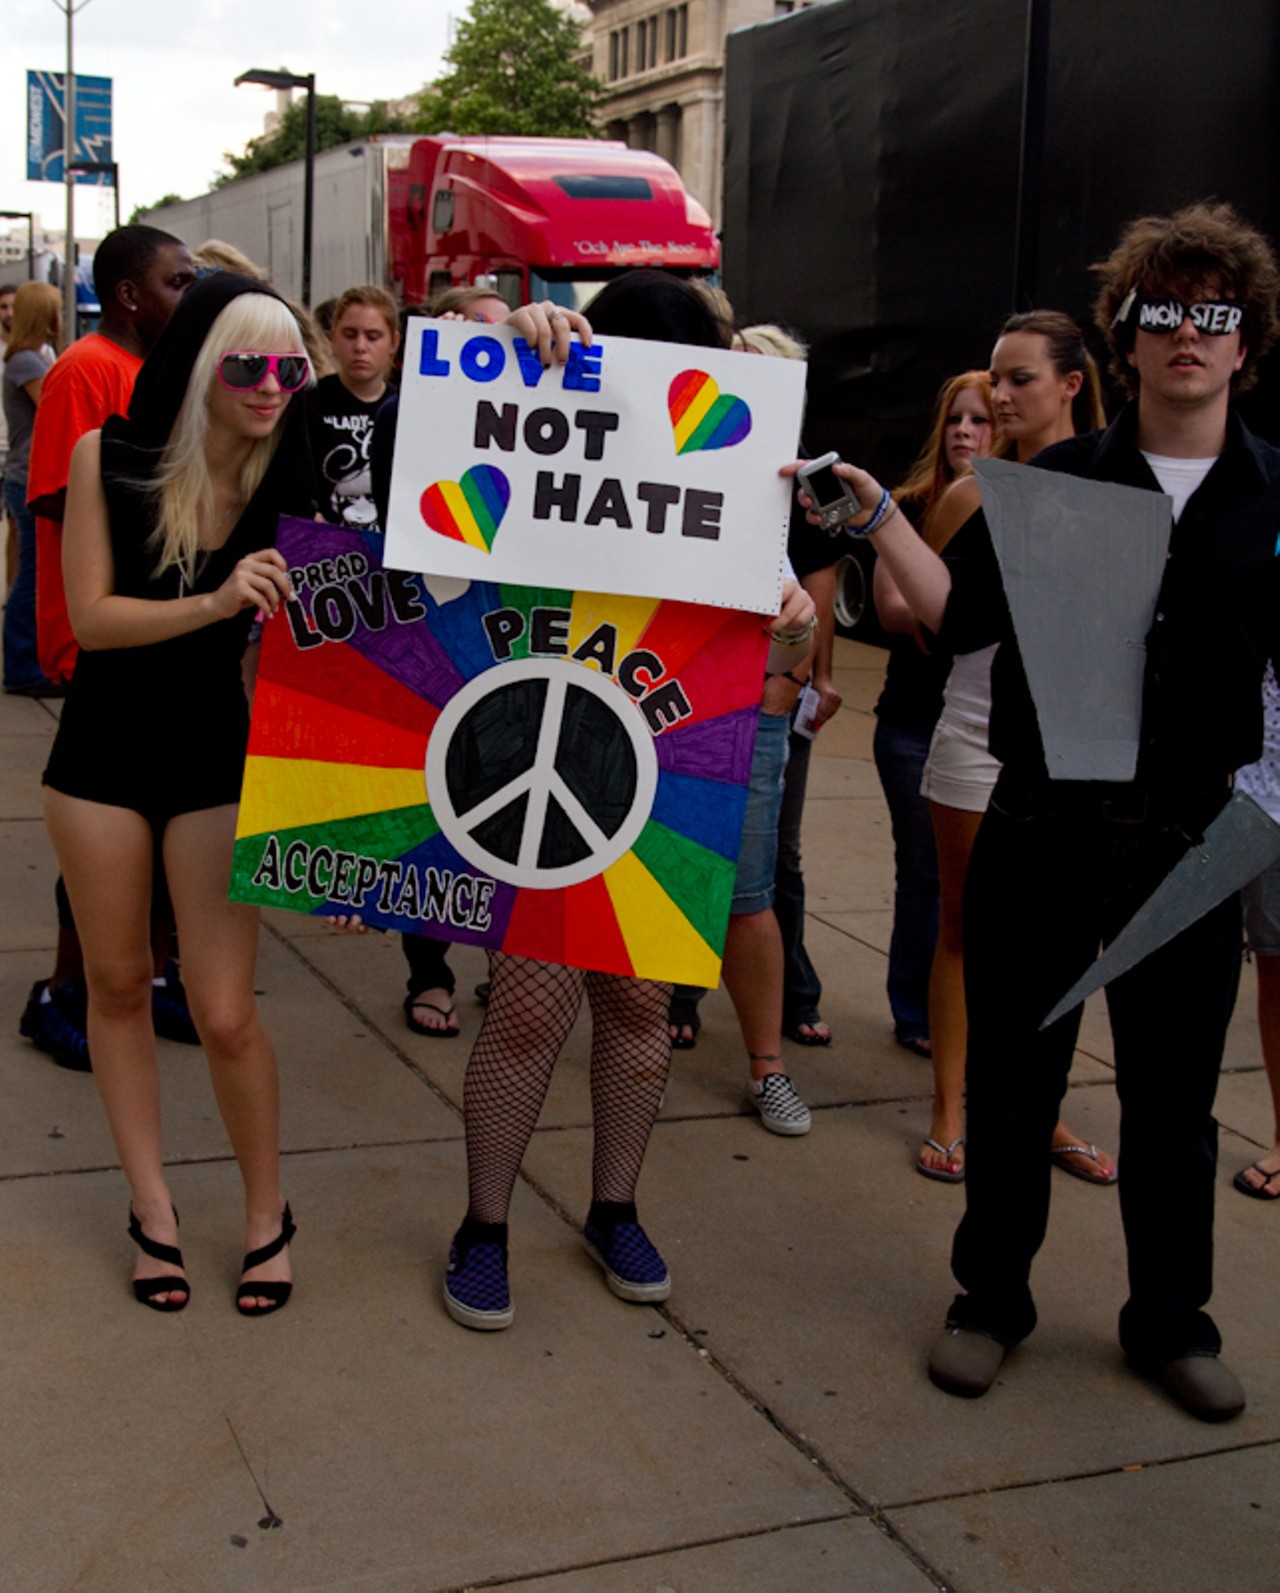 See more of Lady Gaga's Little Monsters from the Scottrade Center in St. Louis, 7/17/2010.